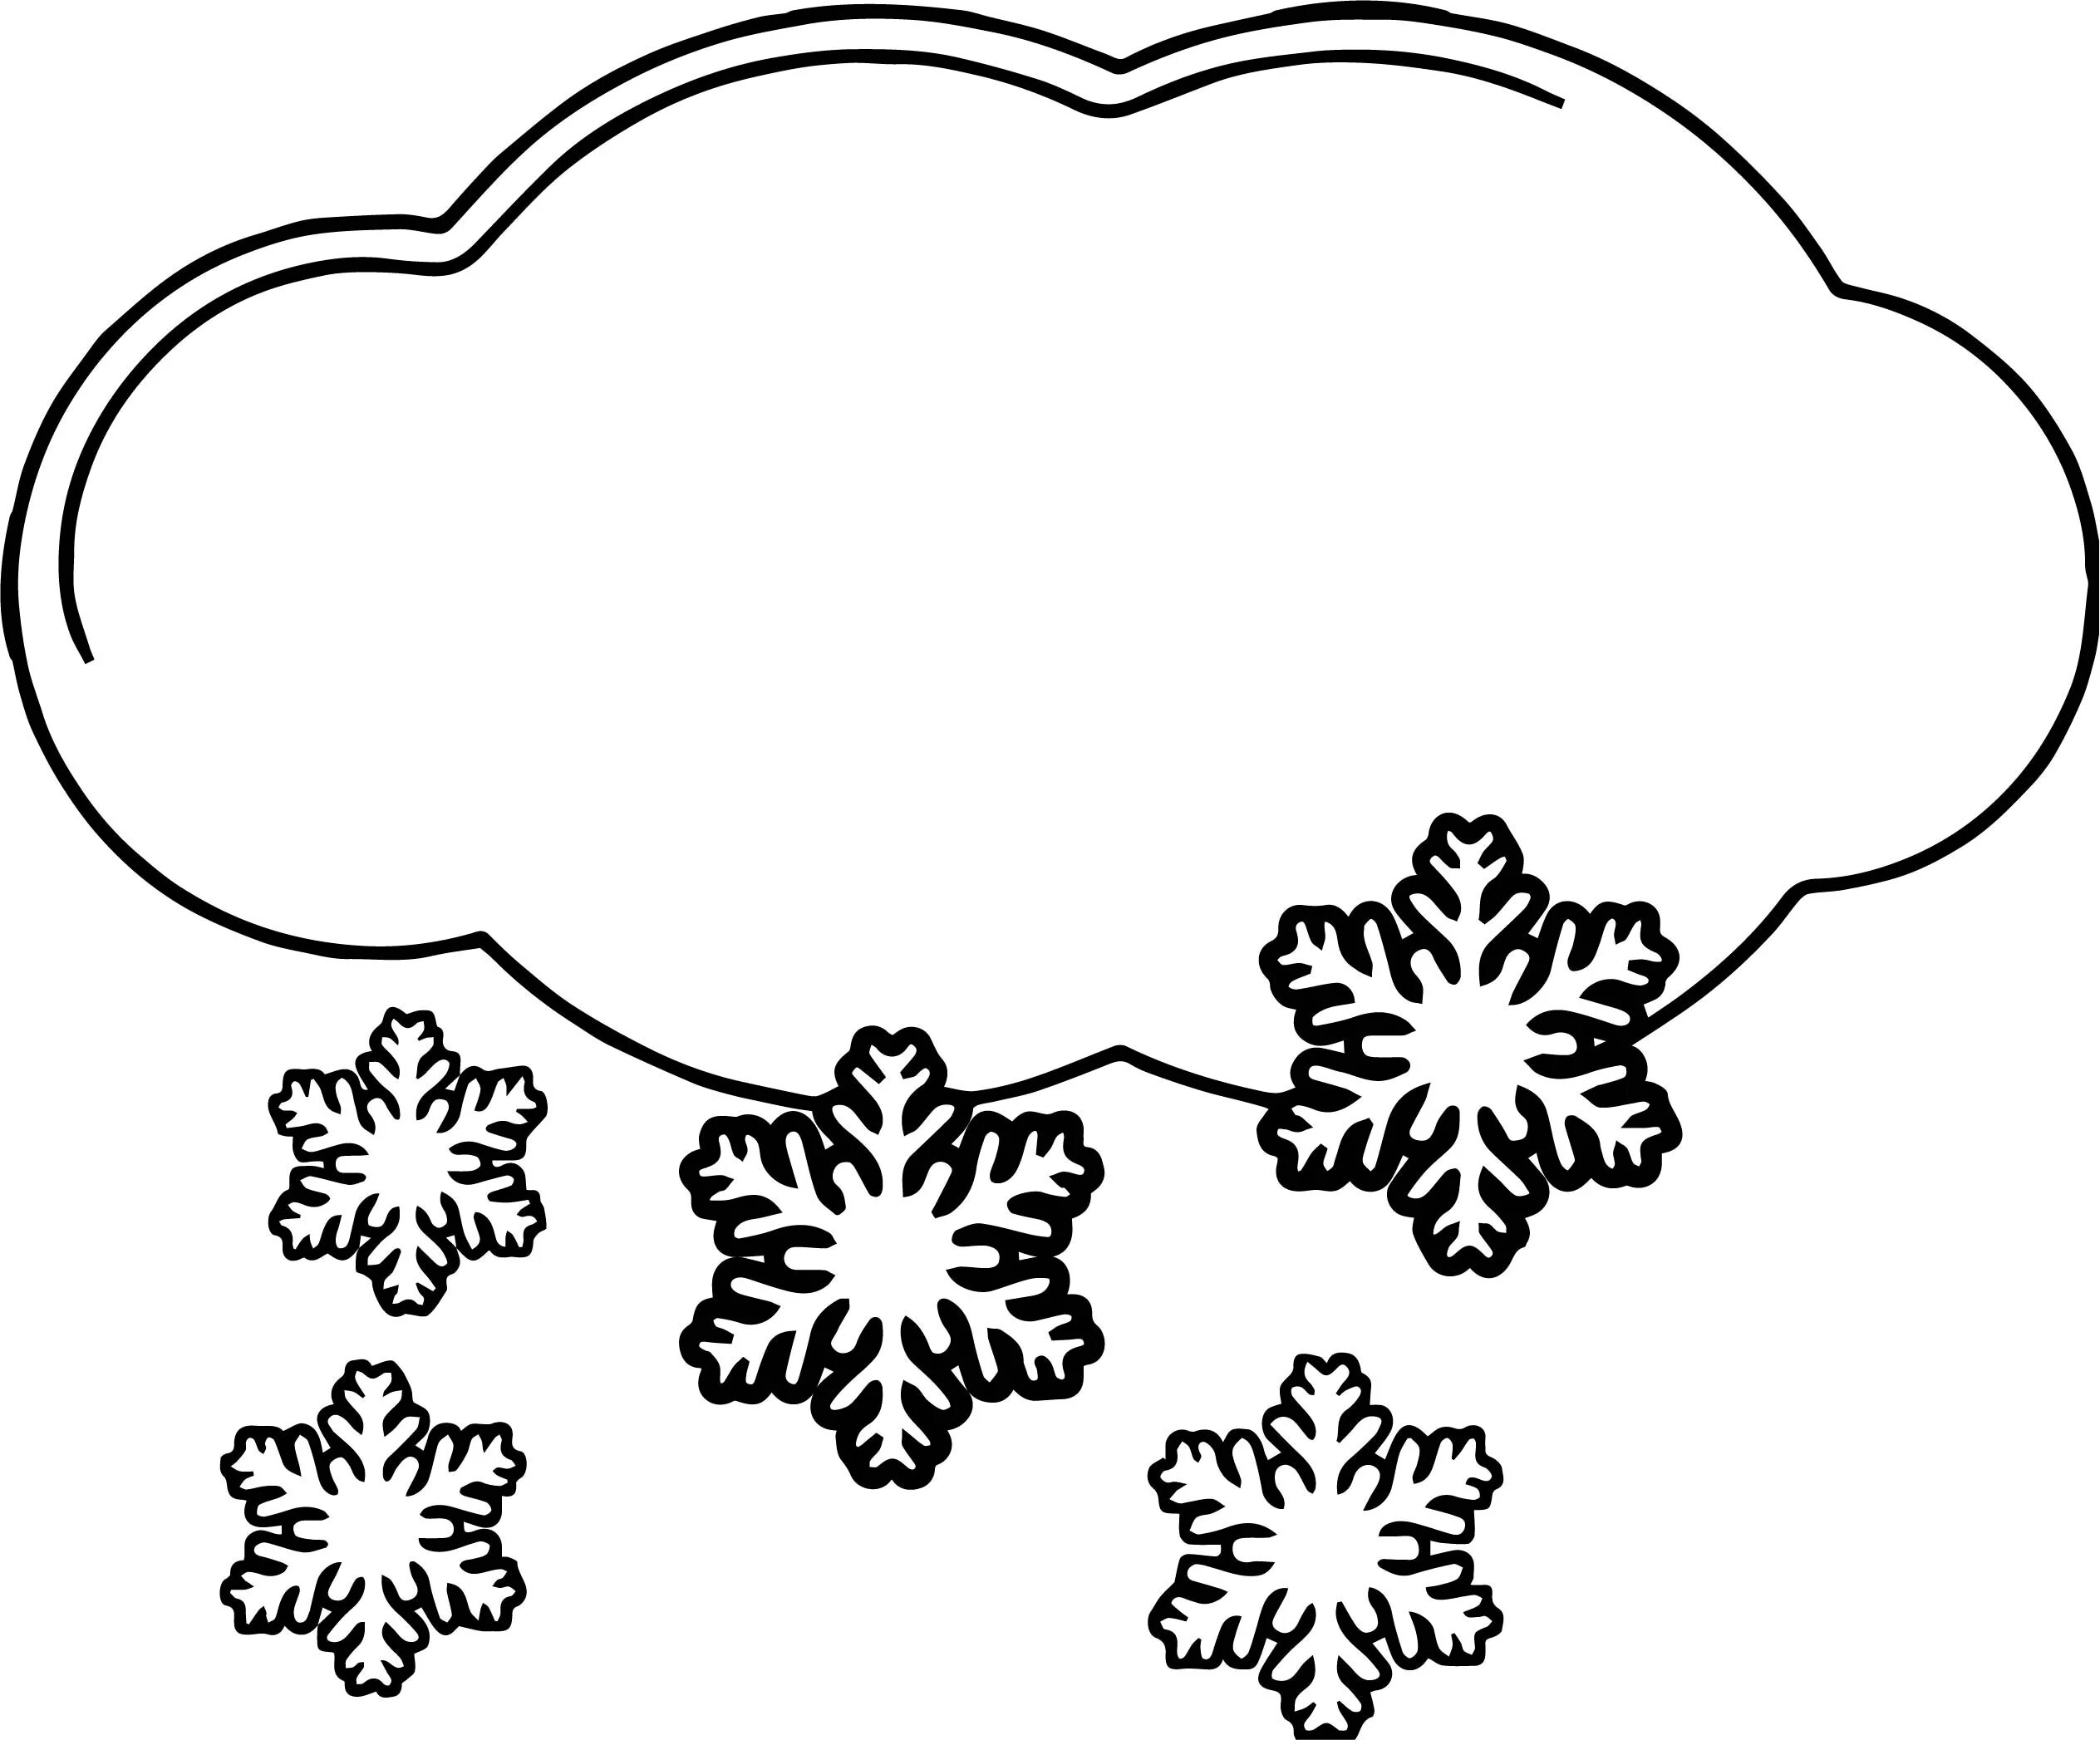 Adorable snowdrift coloring page